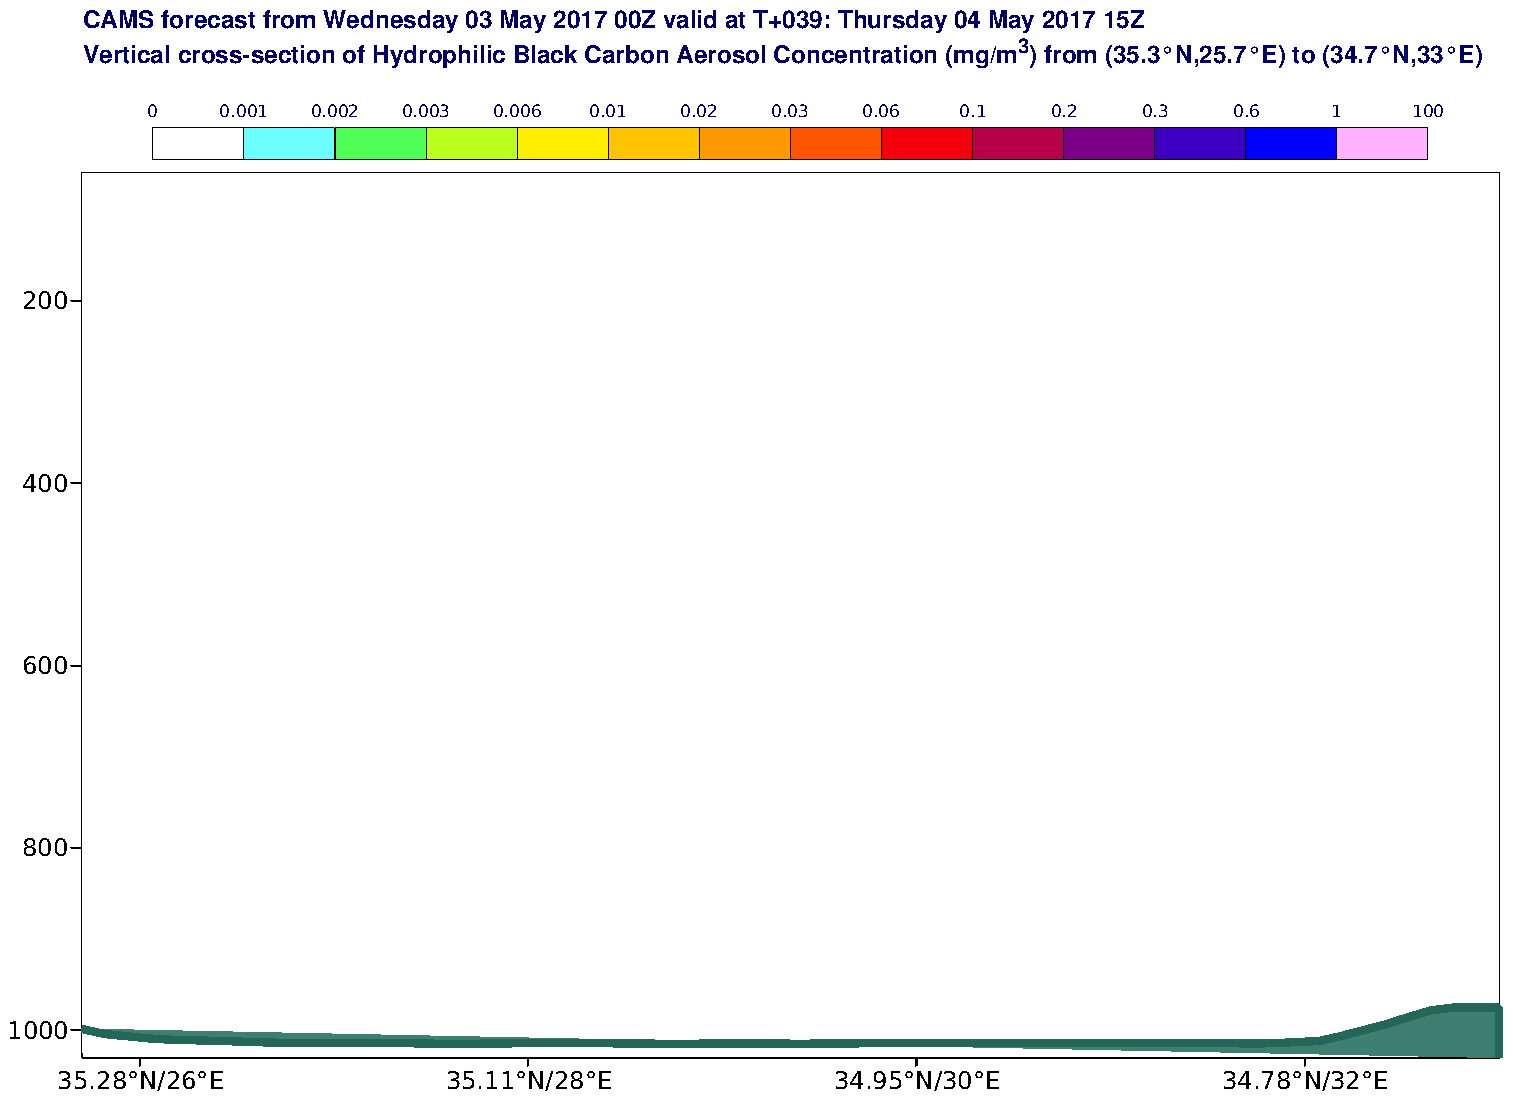 Vertical cross-section of Hydrophilic Black Carbon Aerosol Concentration (mg/m3) valid at T39 - 2017-05-04 15:00